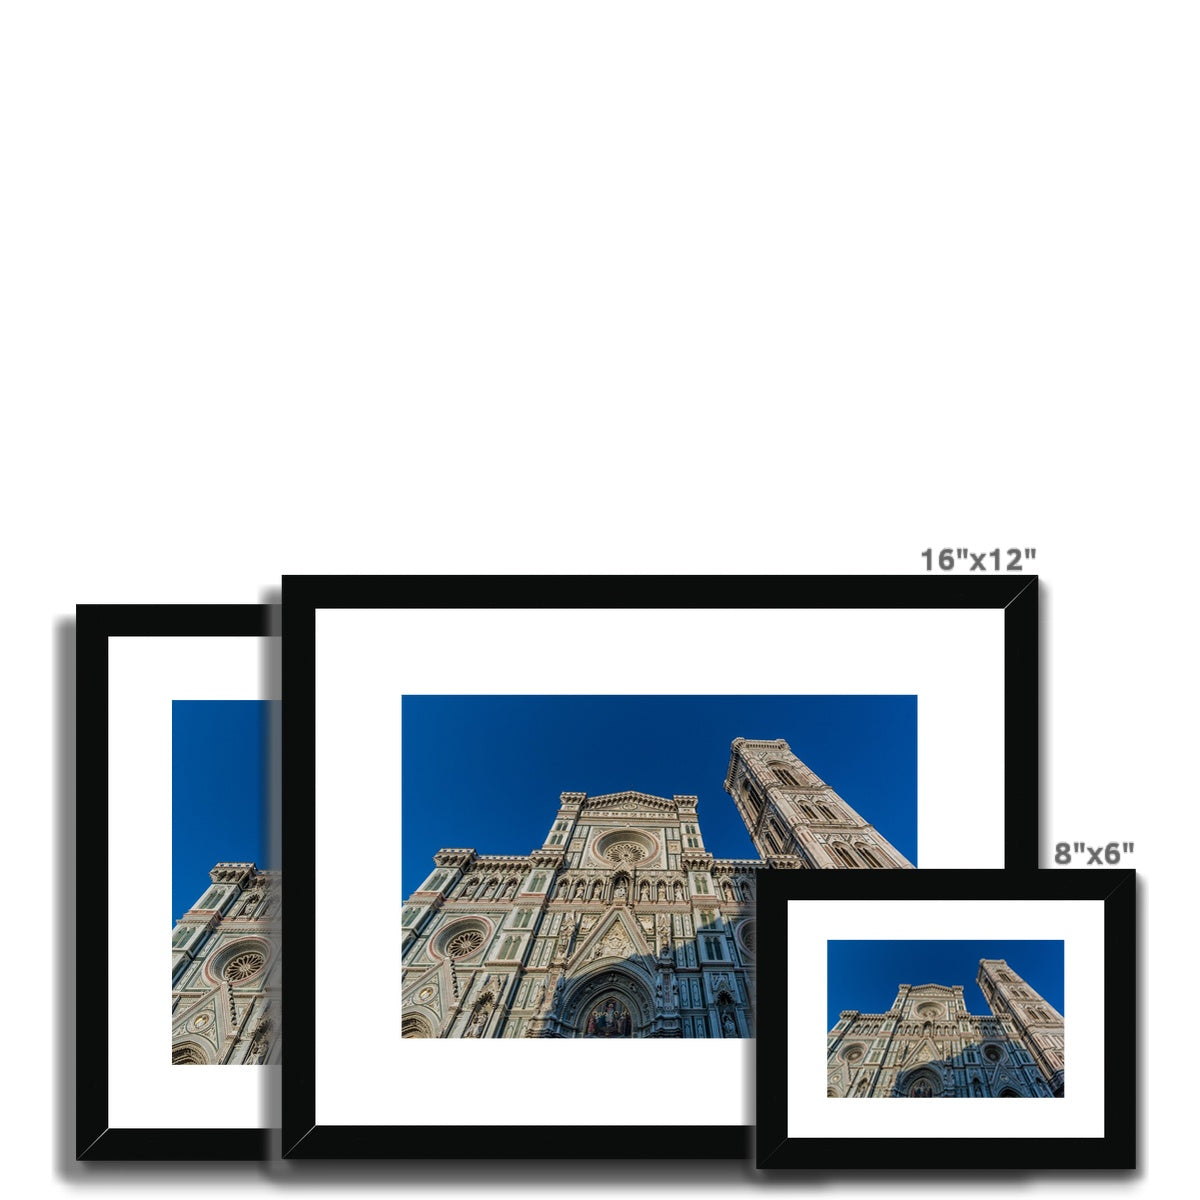 West façade of Florence Cathedral bell tower. Florence, Italy. Framed & Mounted Print